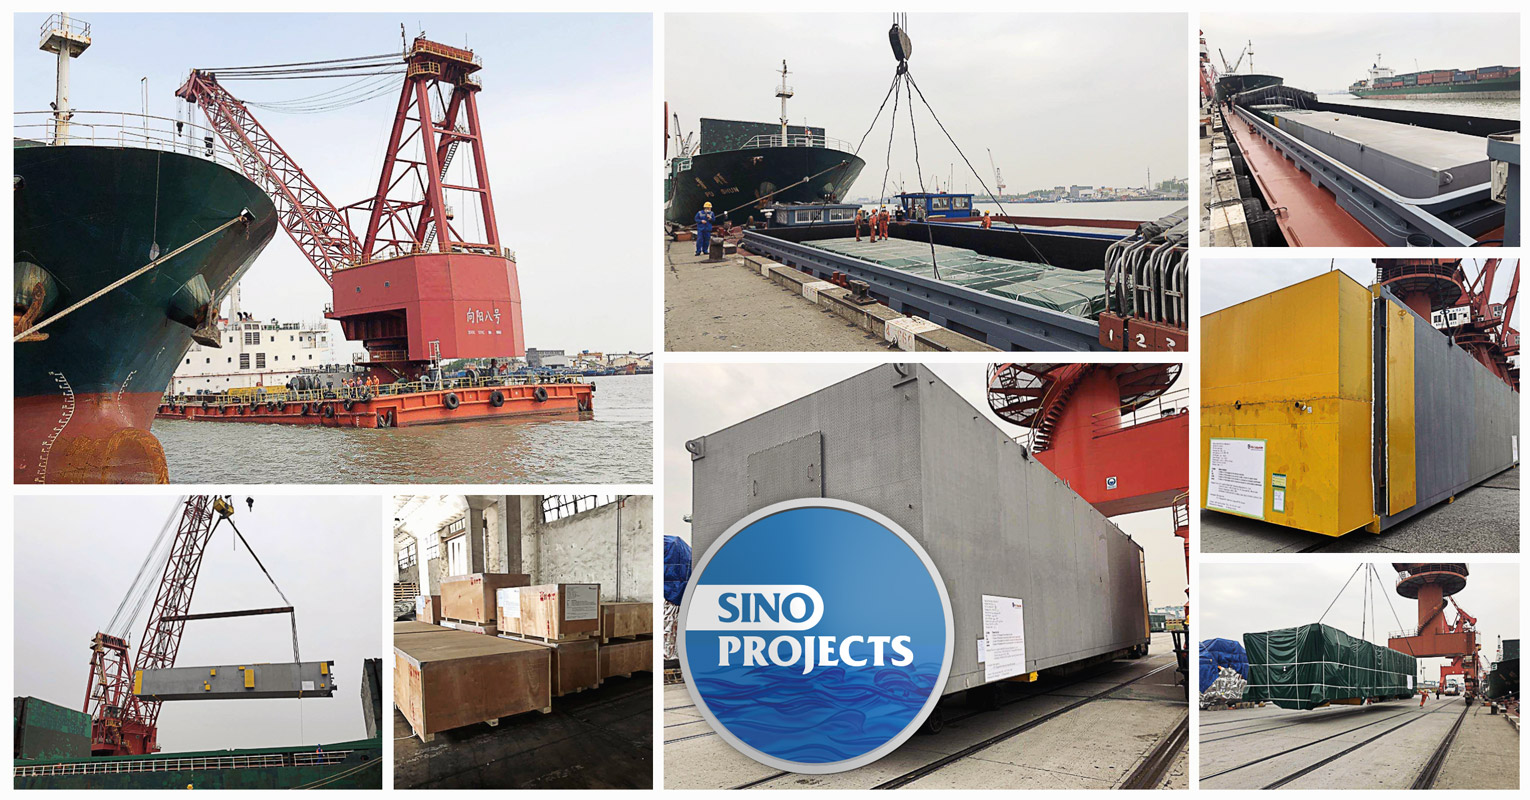 SinoProjects Used Floating Crane Xiangyang Number 8 at Shanghai Port for Loading Cold Boxes to Korea